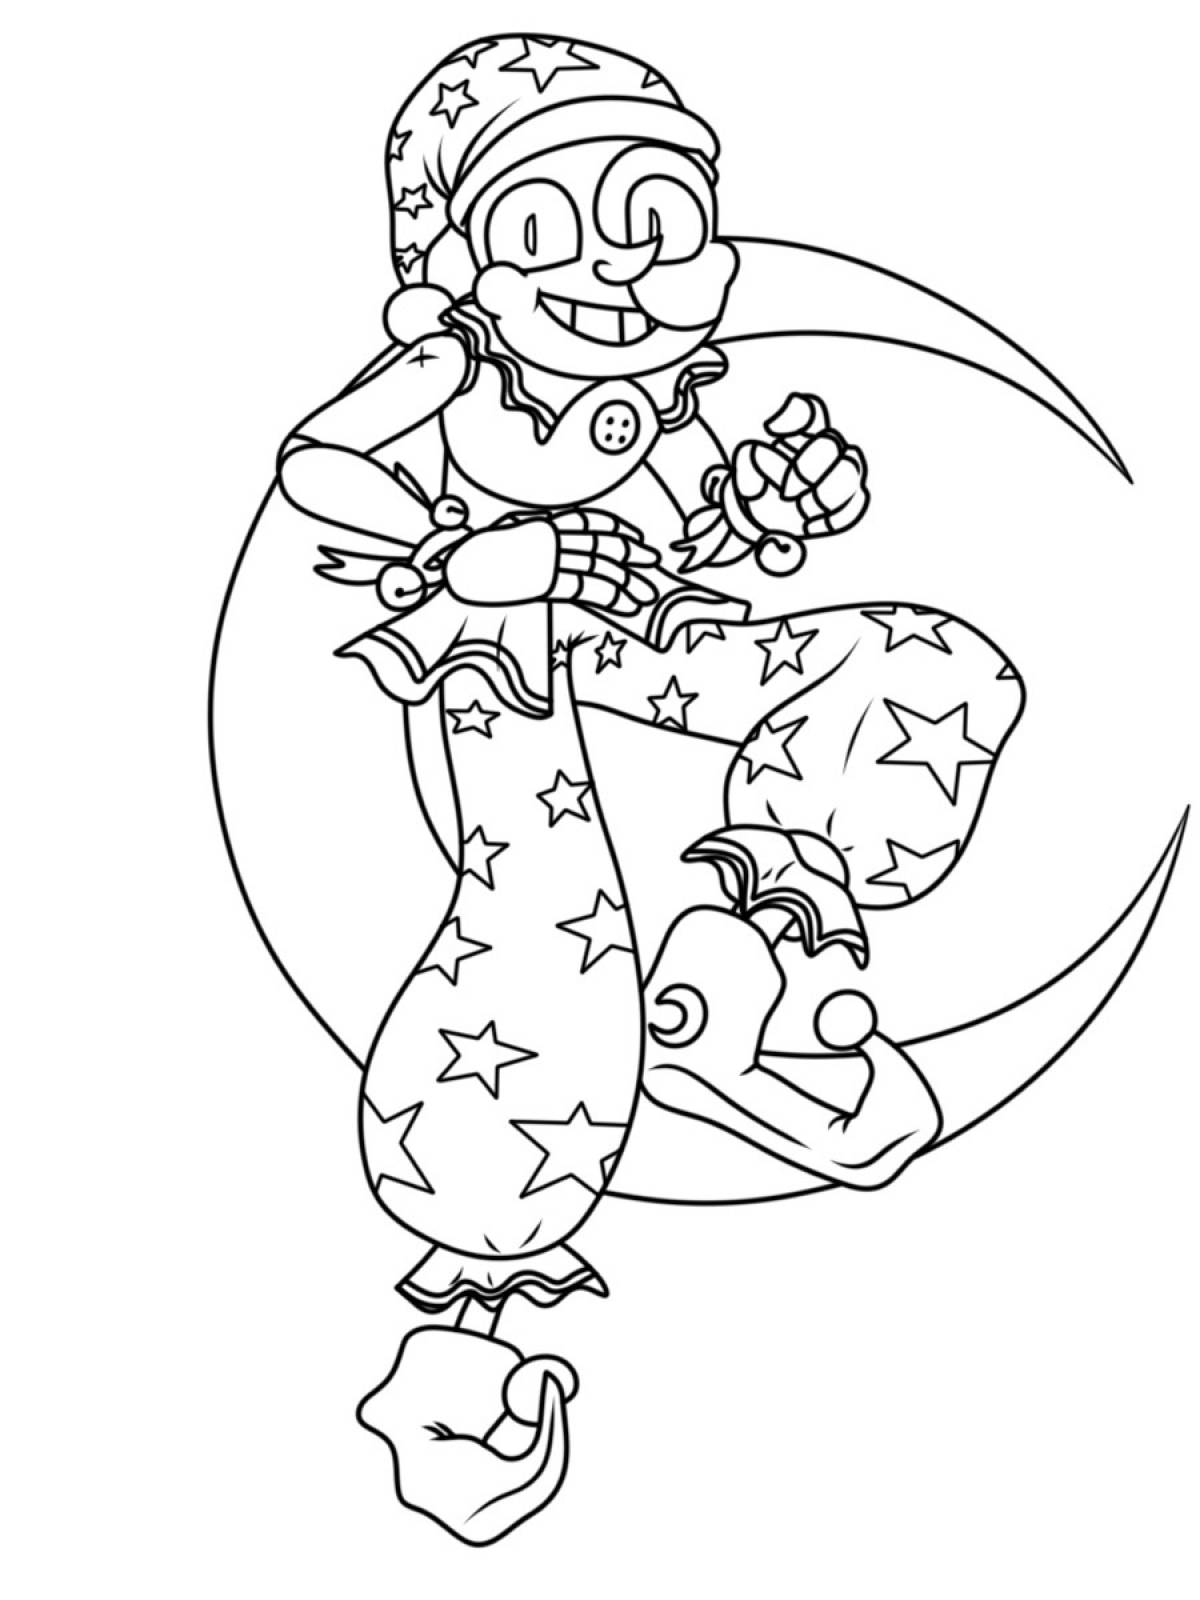 Animated sanddrop coloring page